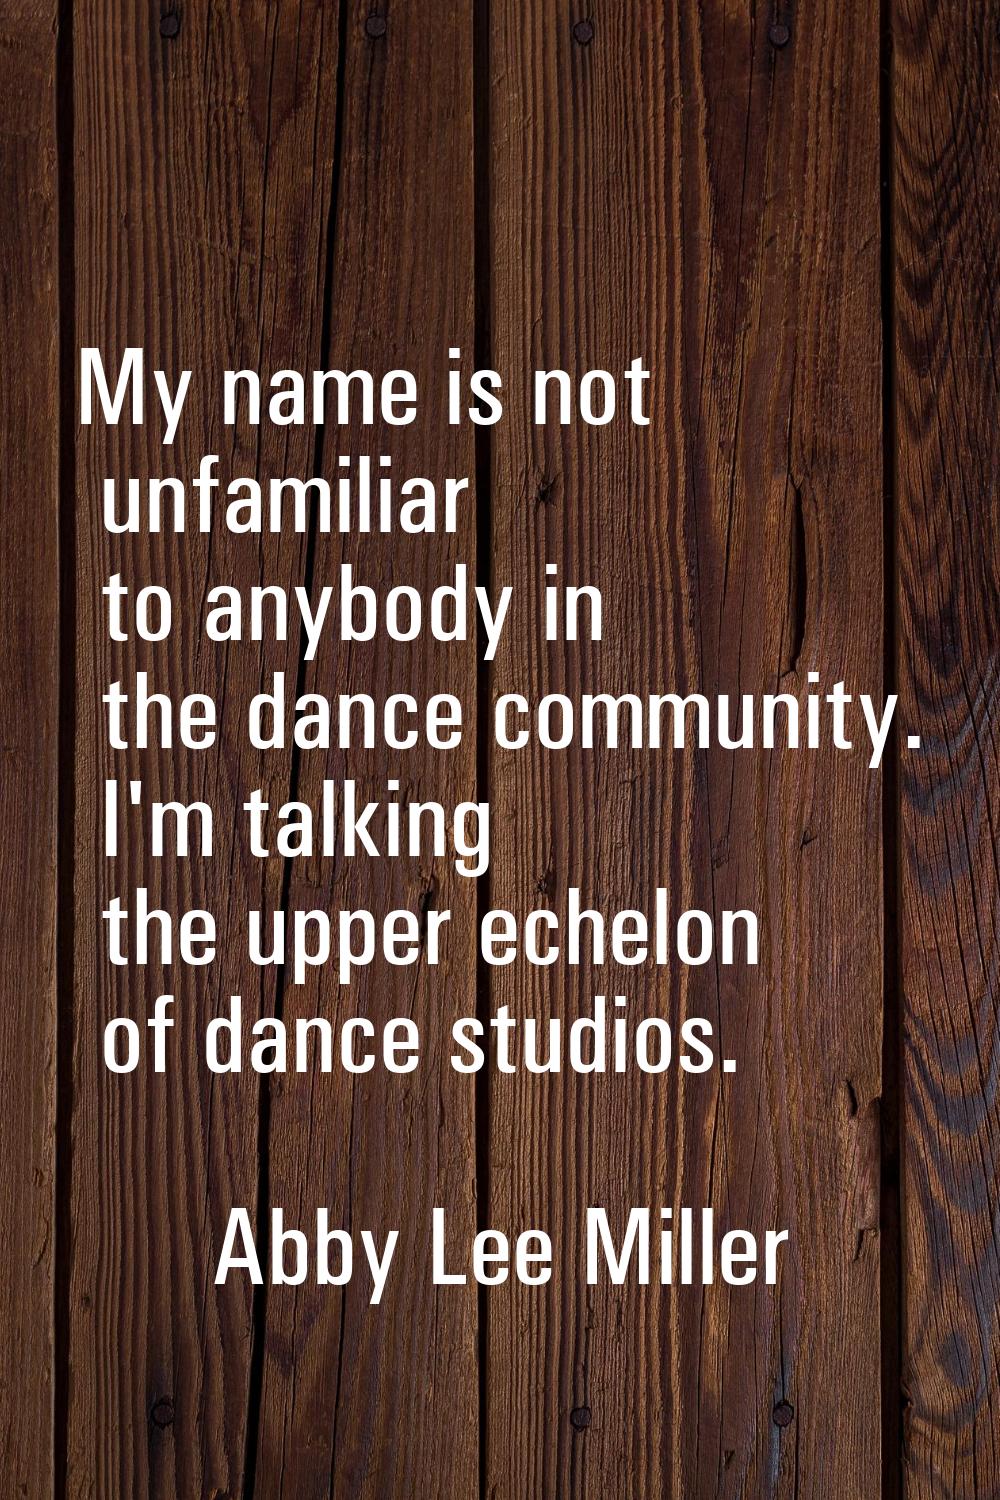 My name is not unfamiliar to anybody in the dance community. I'm talking the upper echelon of dance